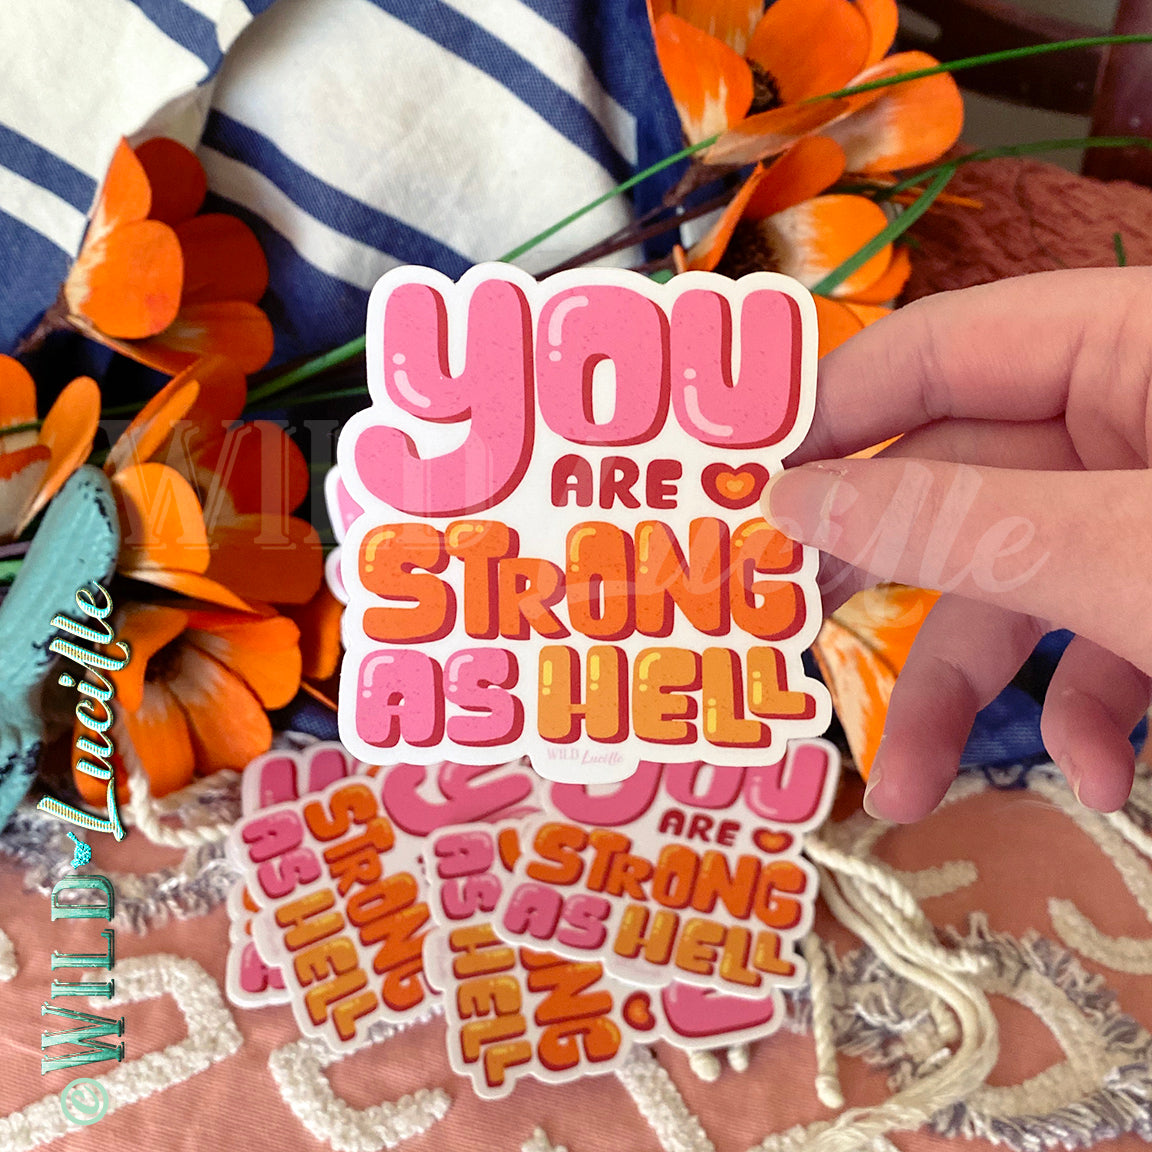 You Are Strong As Hell - Inspirational Vinyl Decal